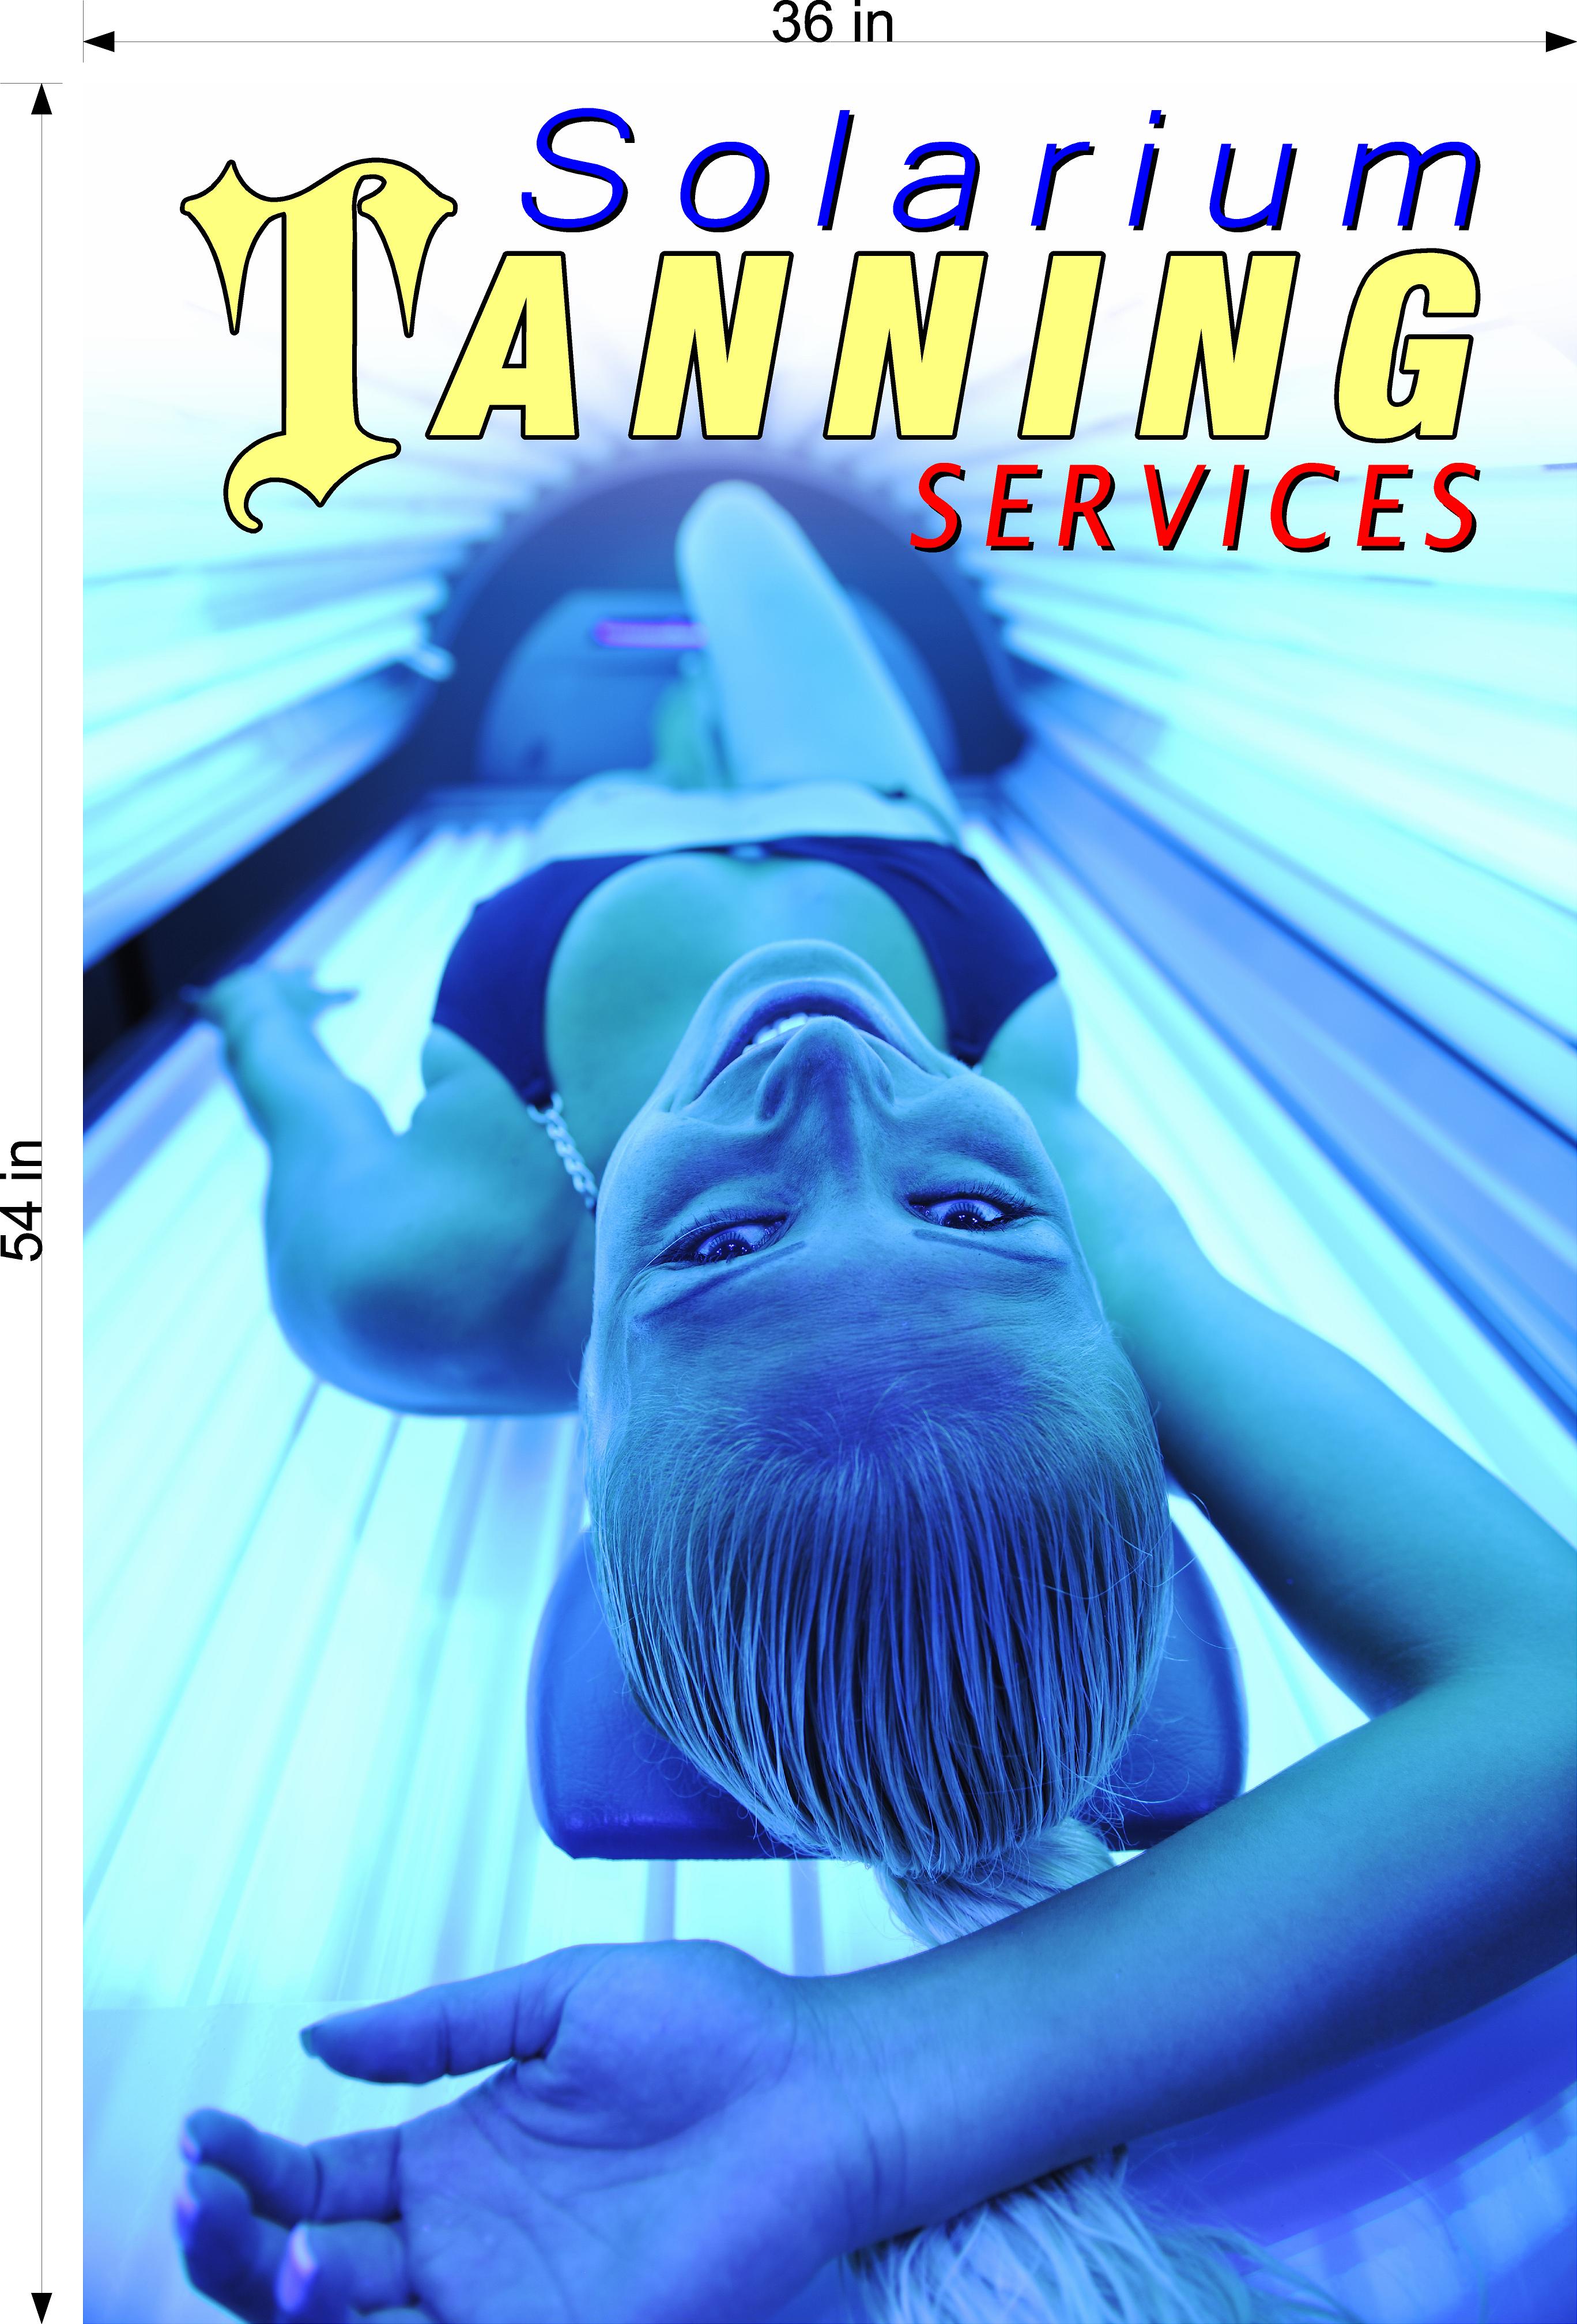 Tanning 05 Photo-Realistic Paper Poster Premium Interior Inside Sign Wall Window Non-Laminated Vertical